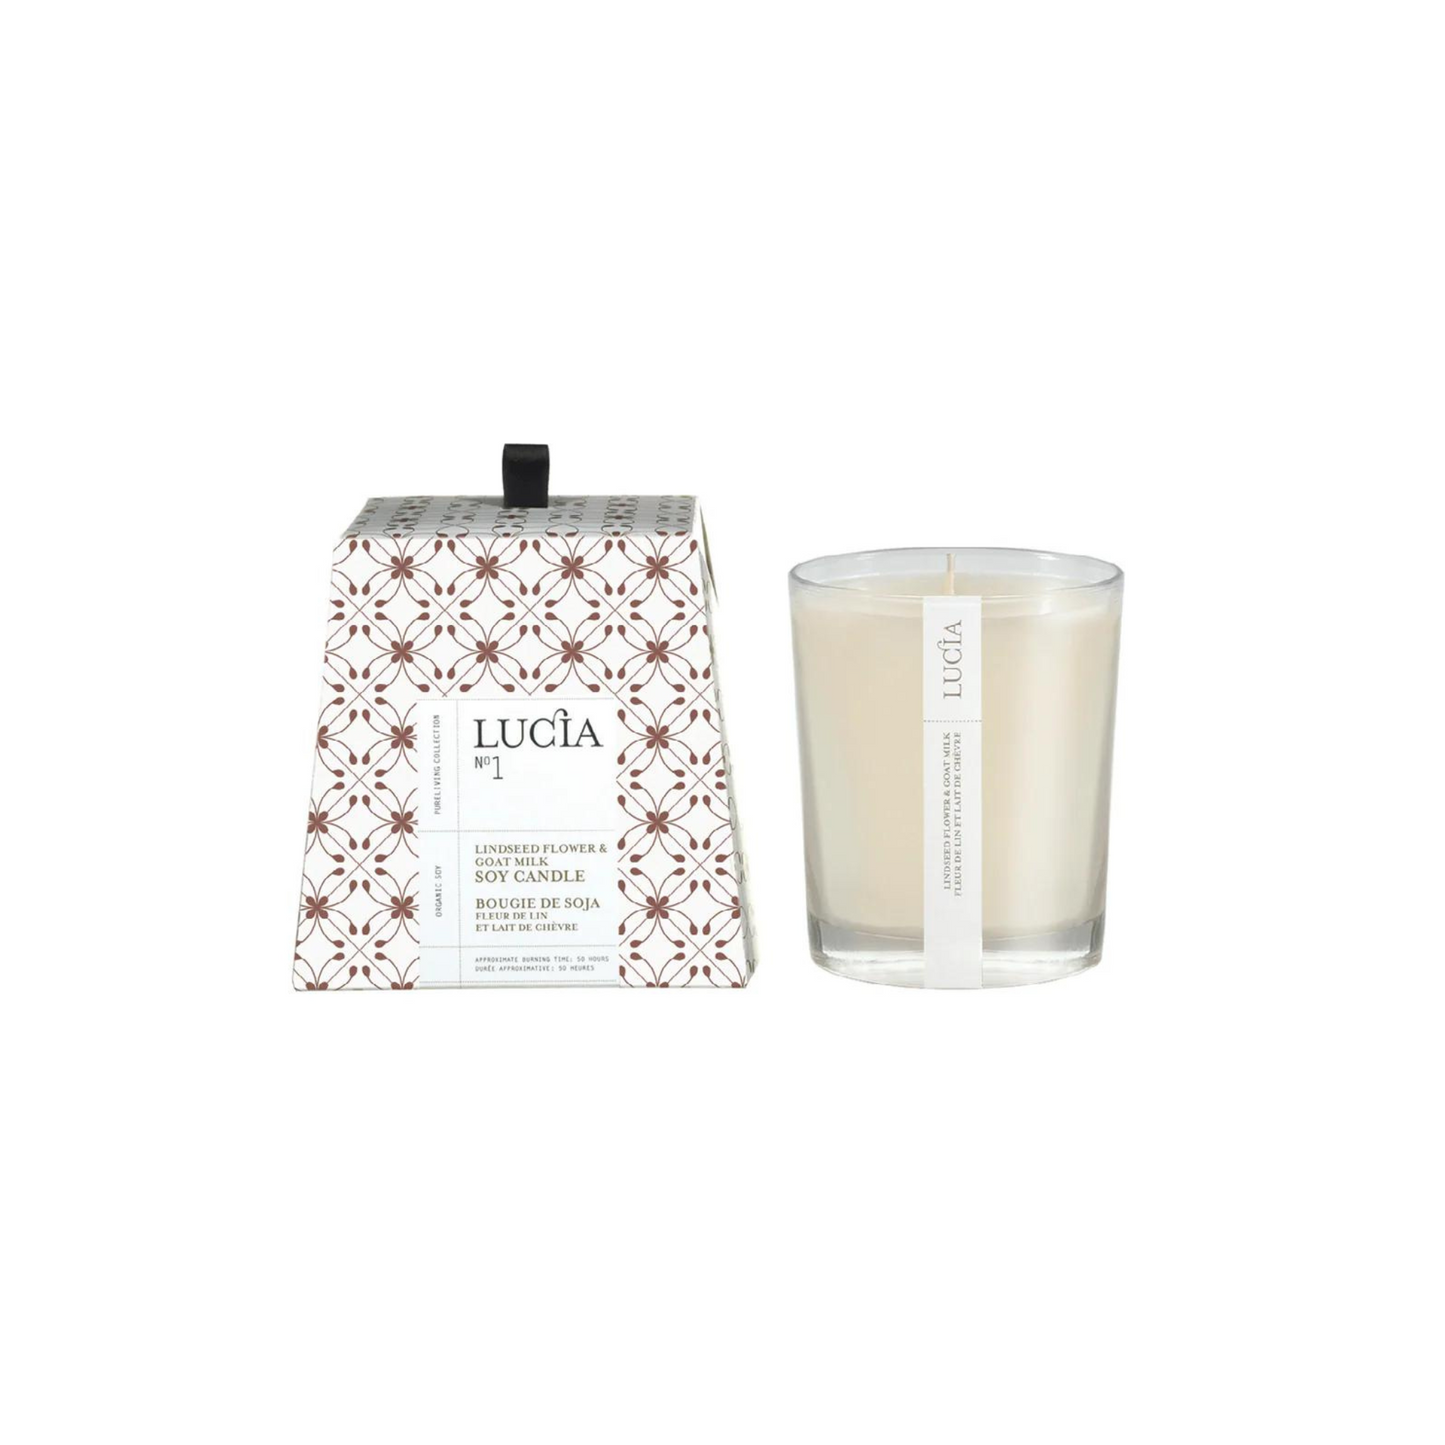 Lucia Soy Candle - Linseed Flower & Vanilla